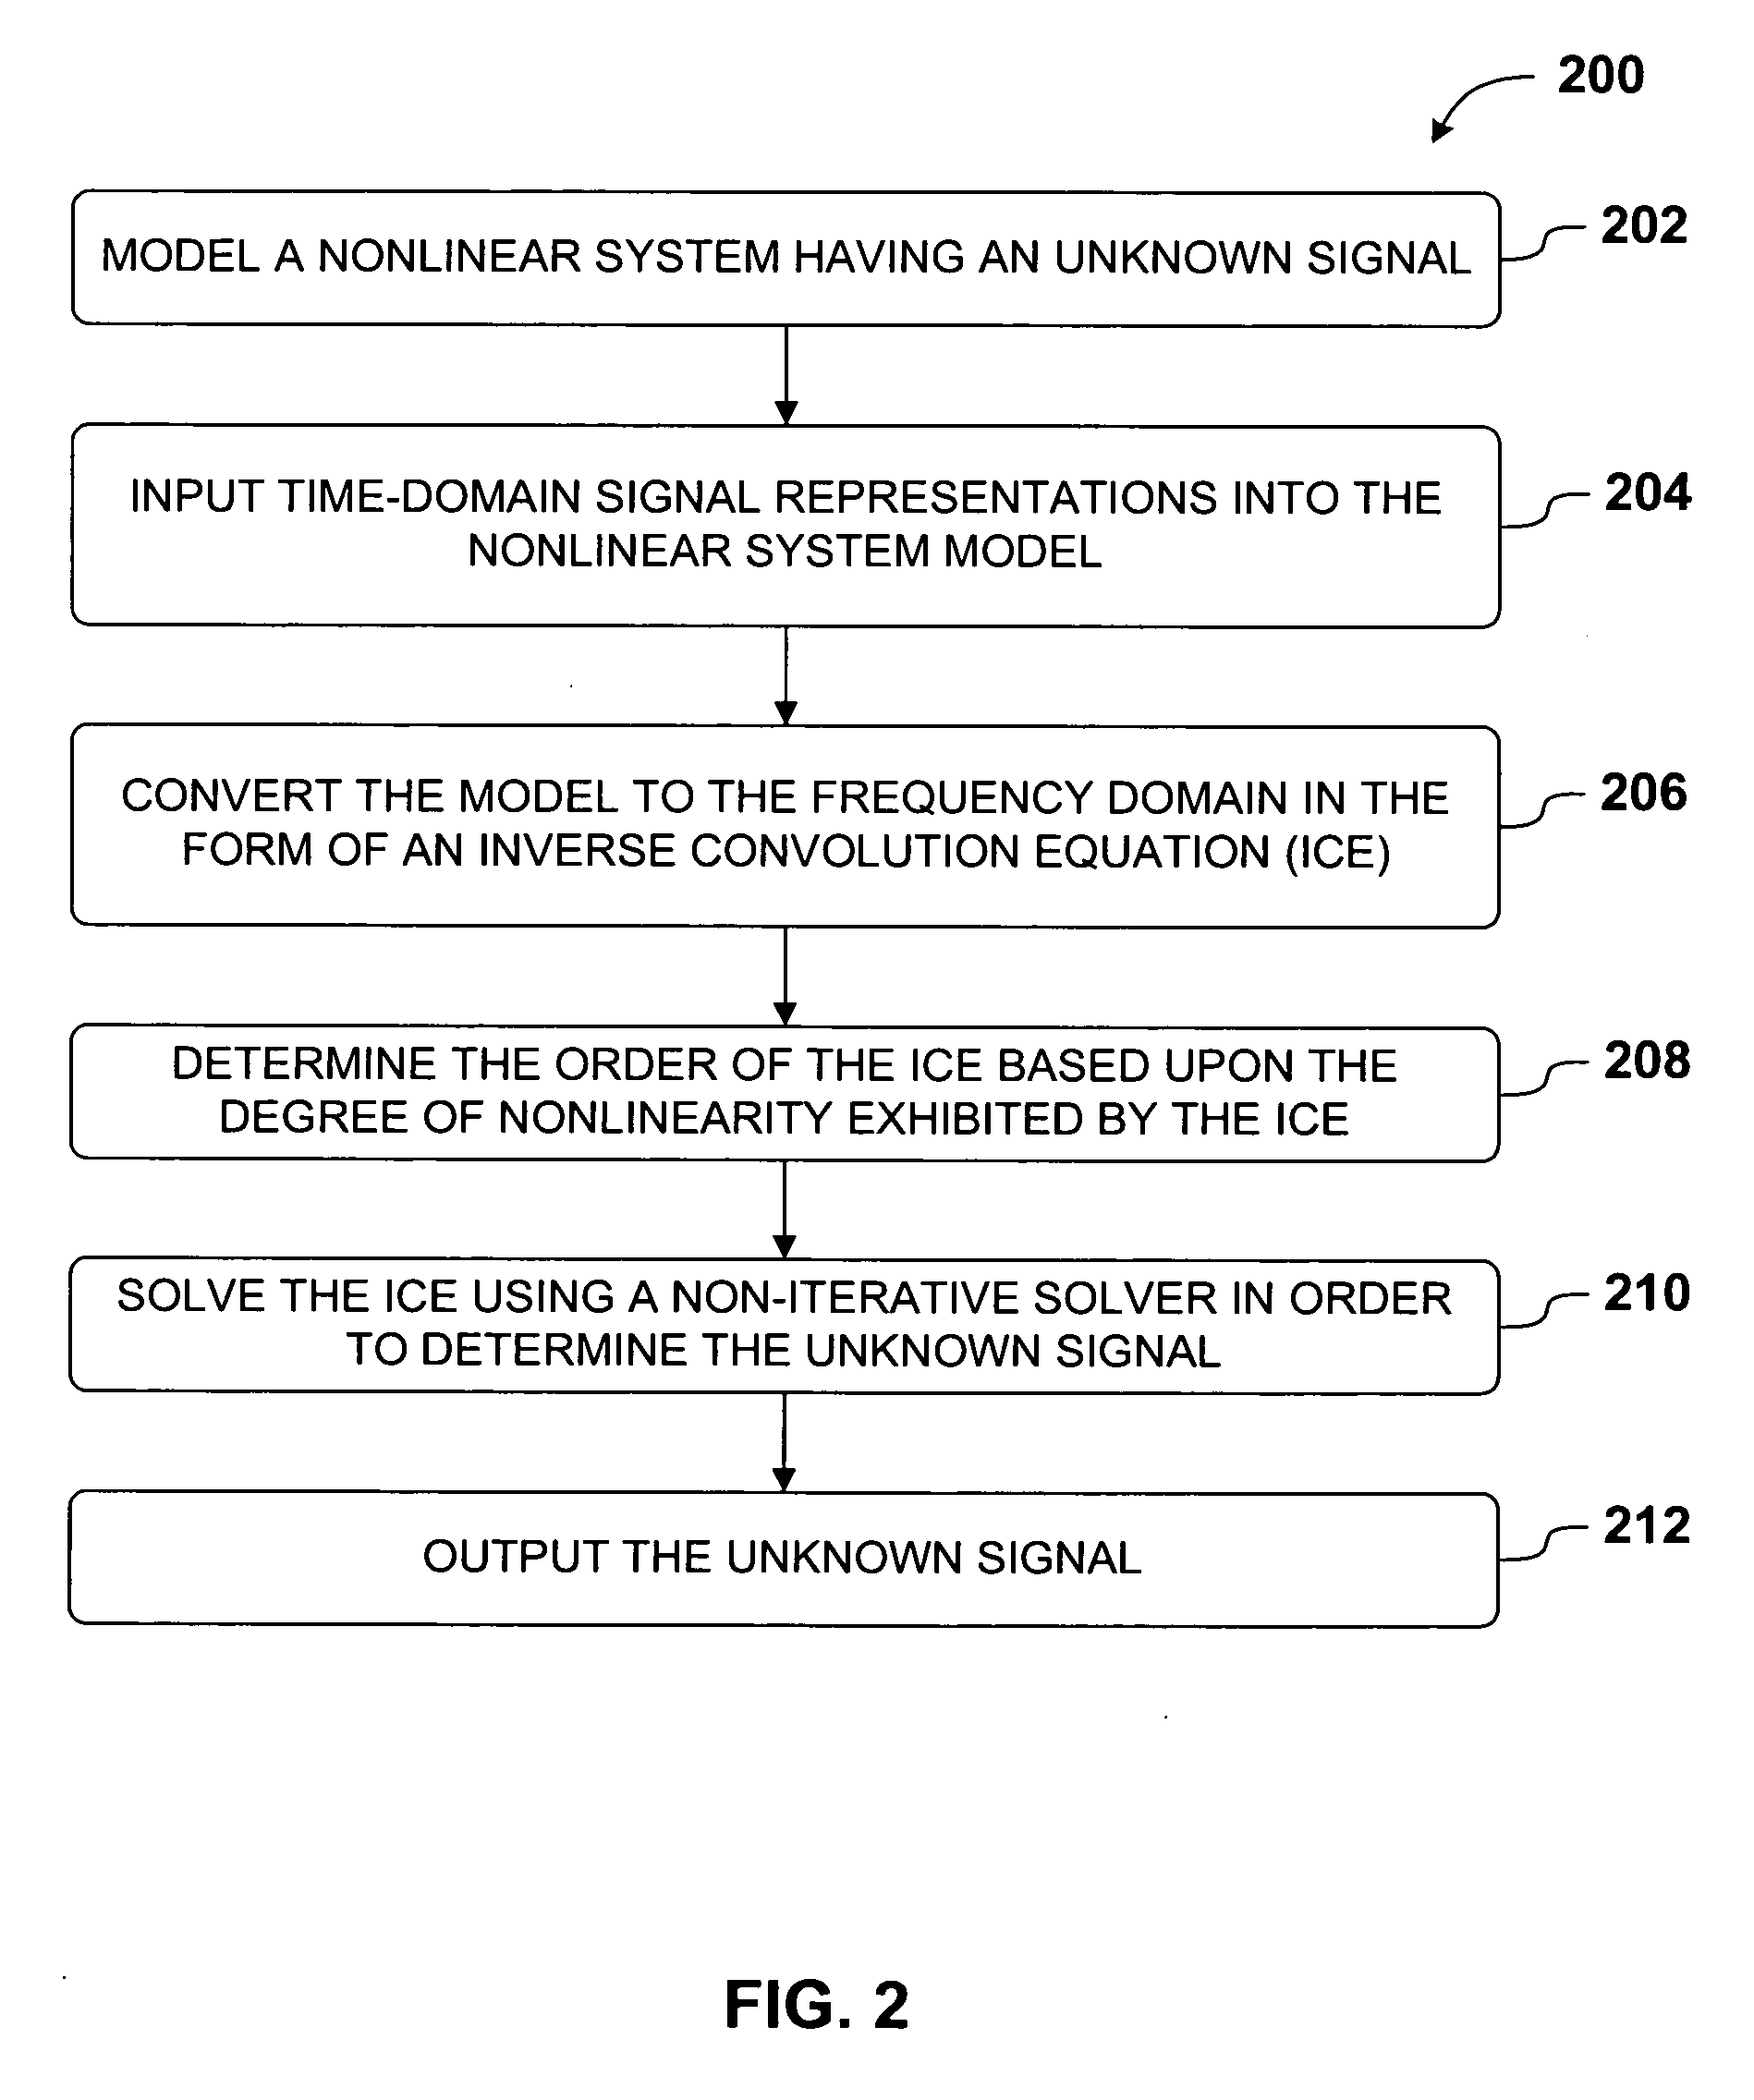 Efficient non-iterative frequency domain method and system for nonlinear analysis